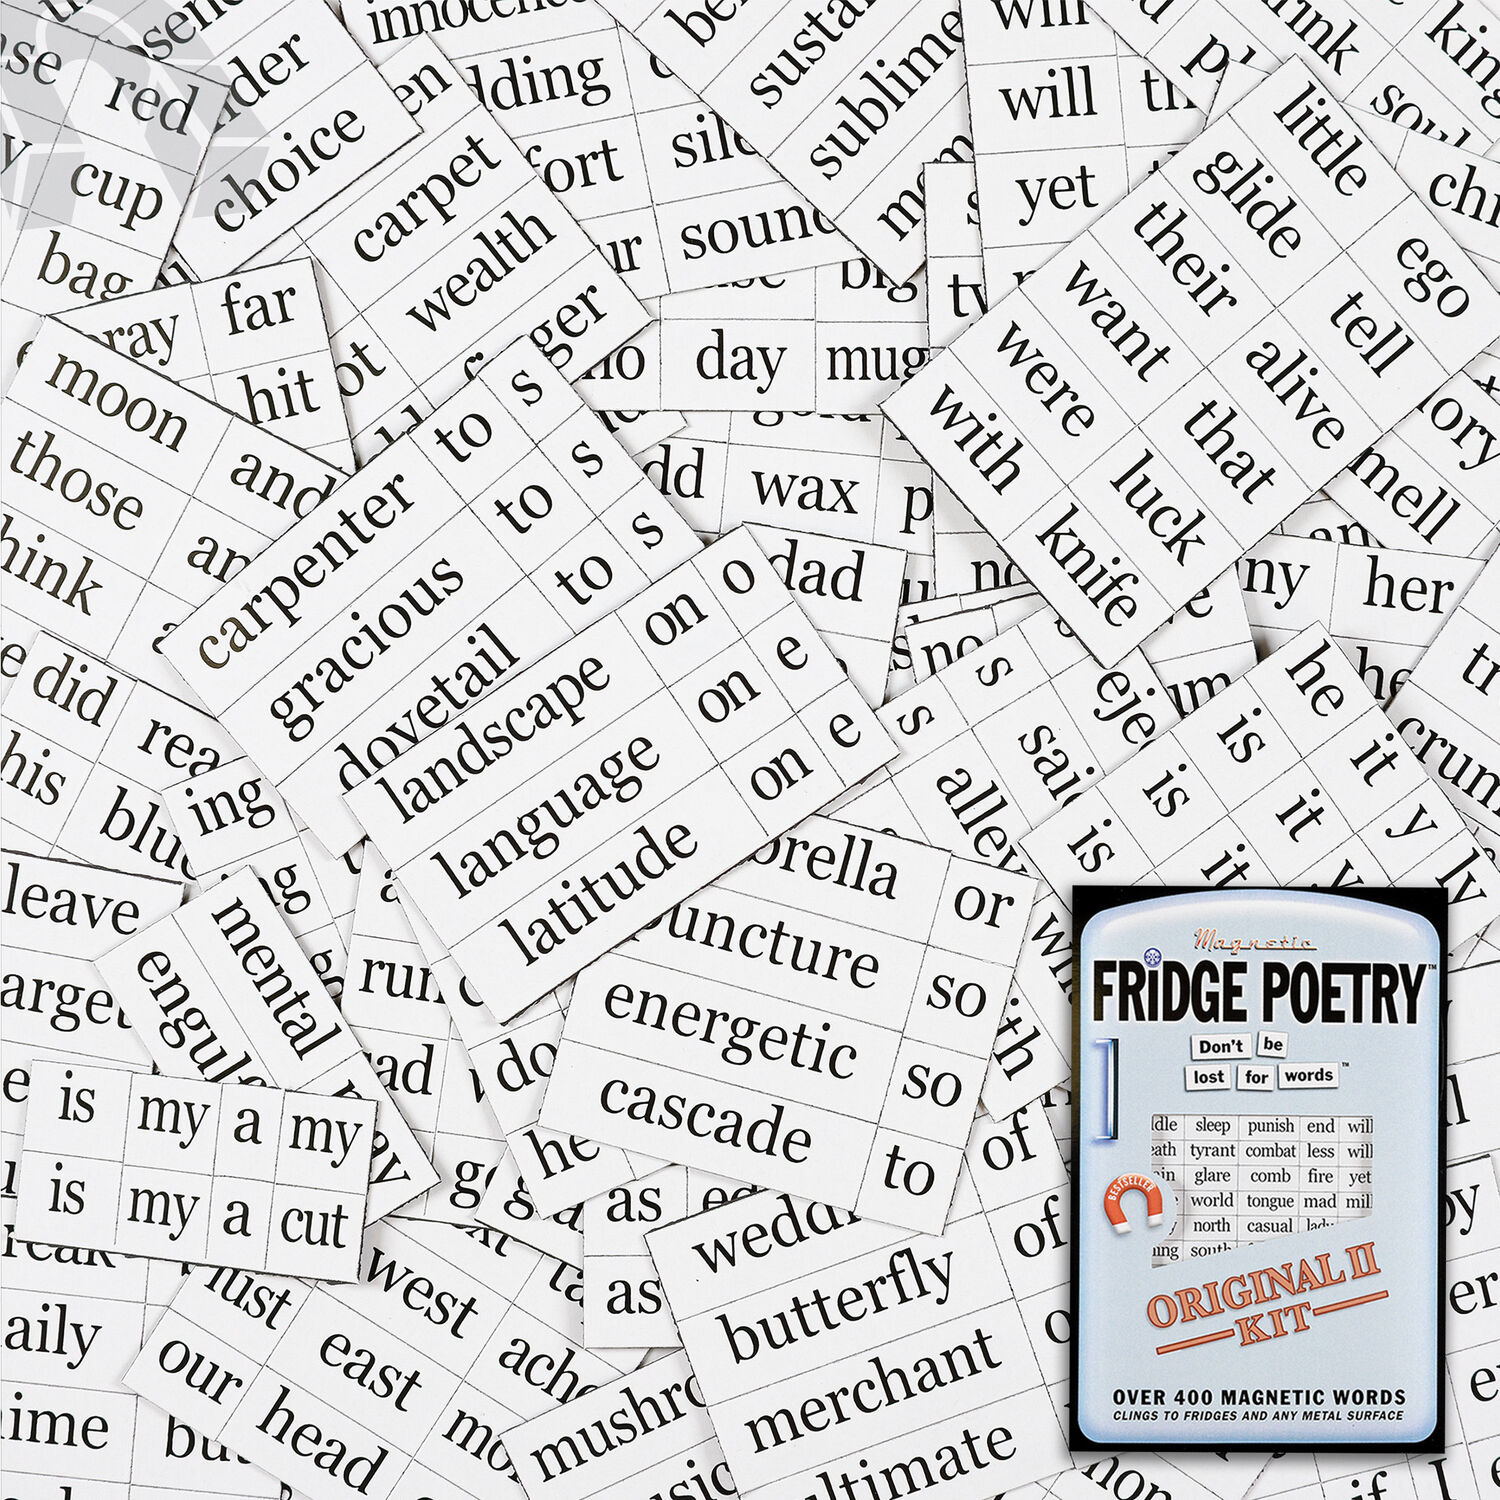 Refrigerator Poetry Word Magnets Guardians of the Galaxy Poetry Magnet Set 